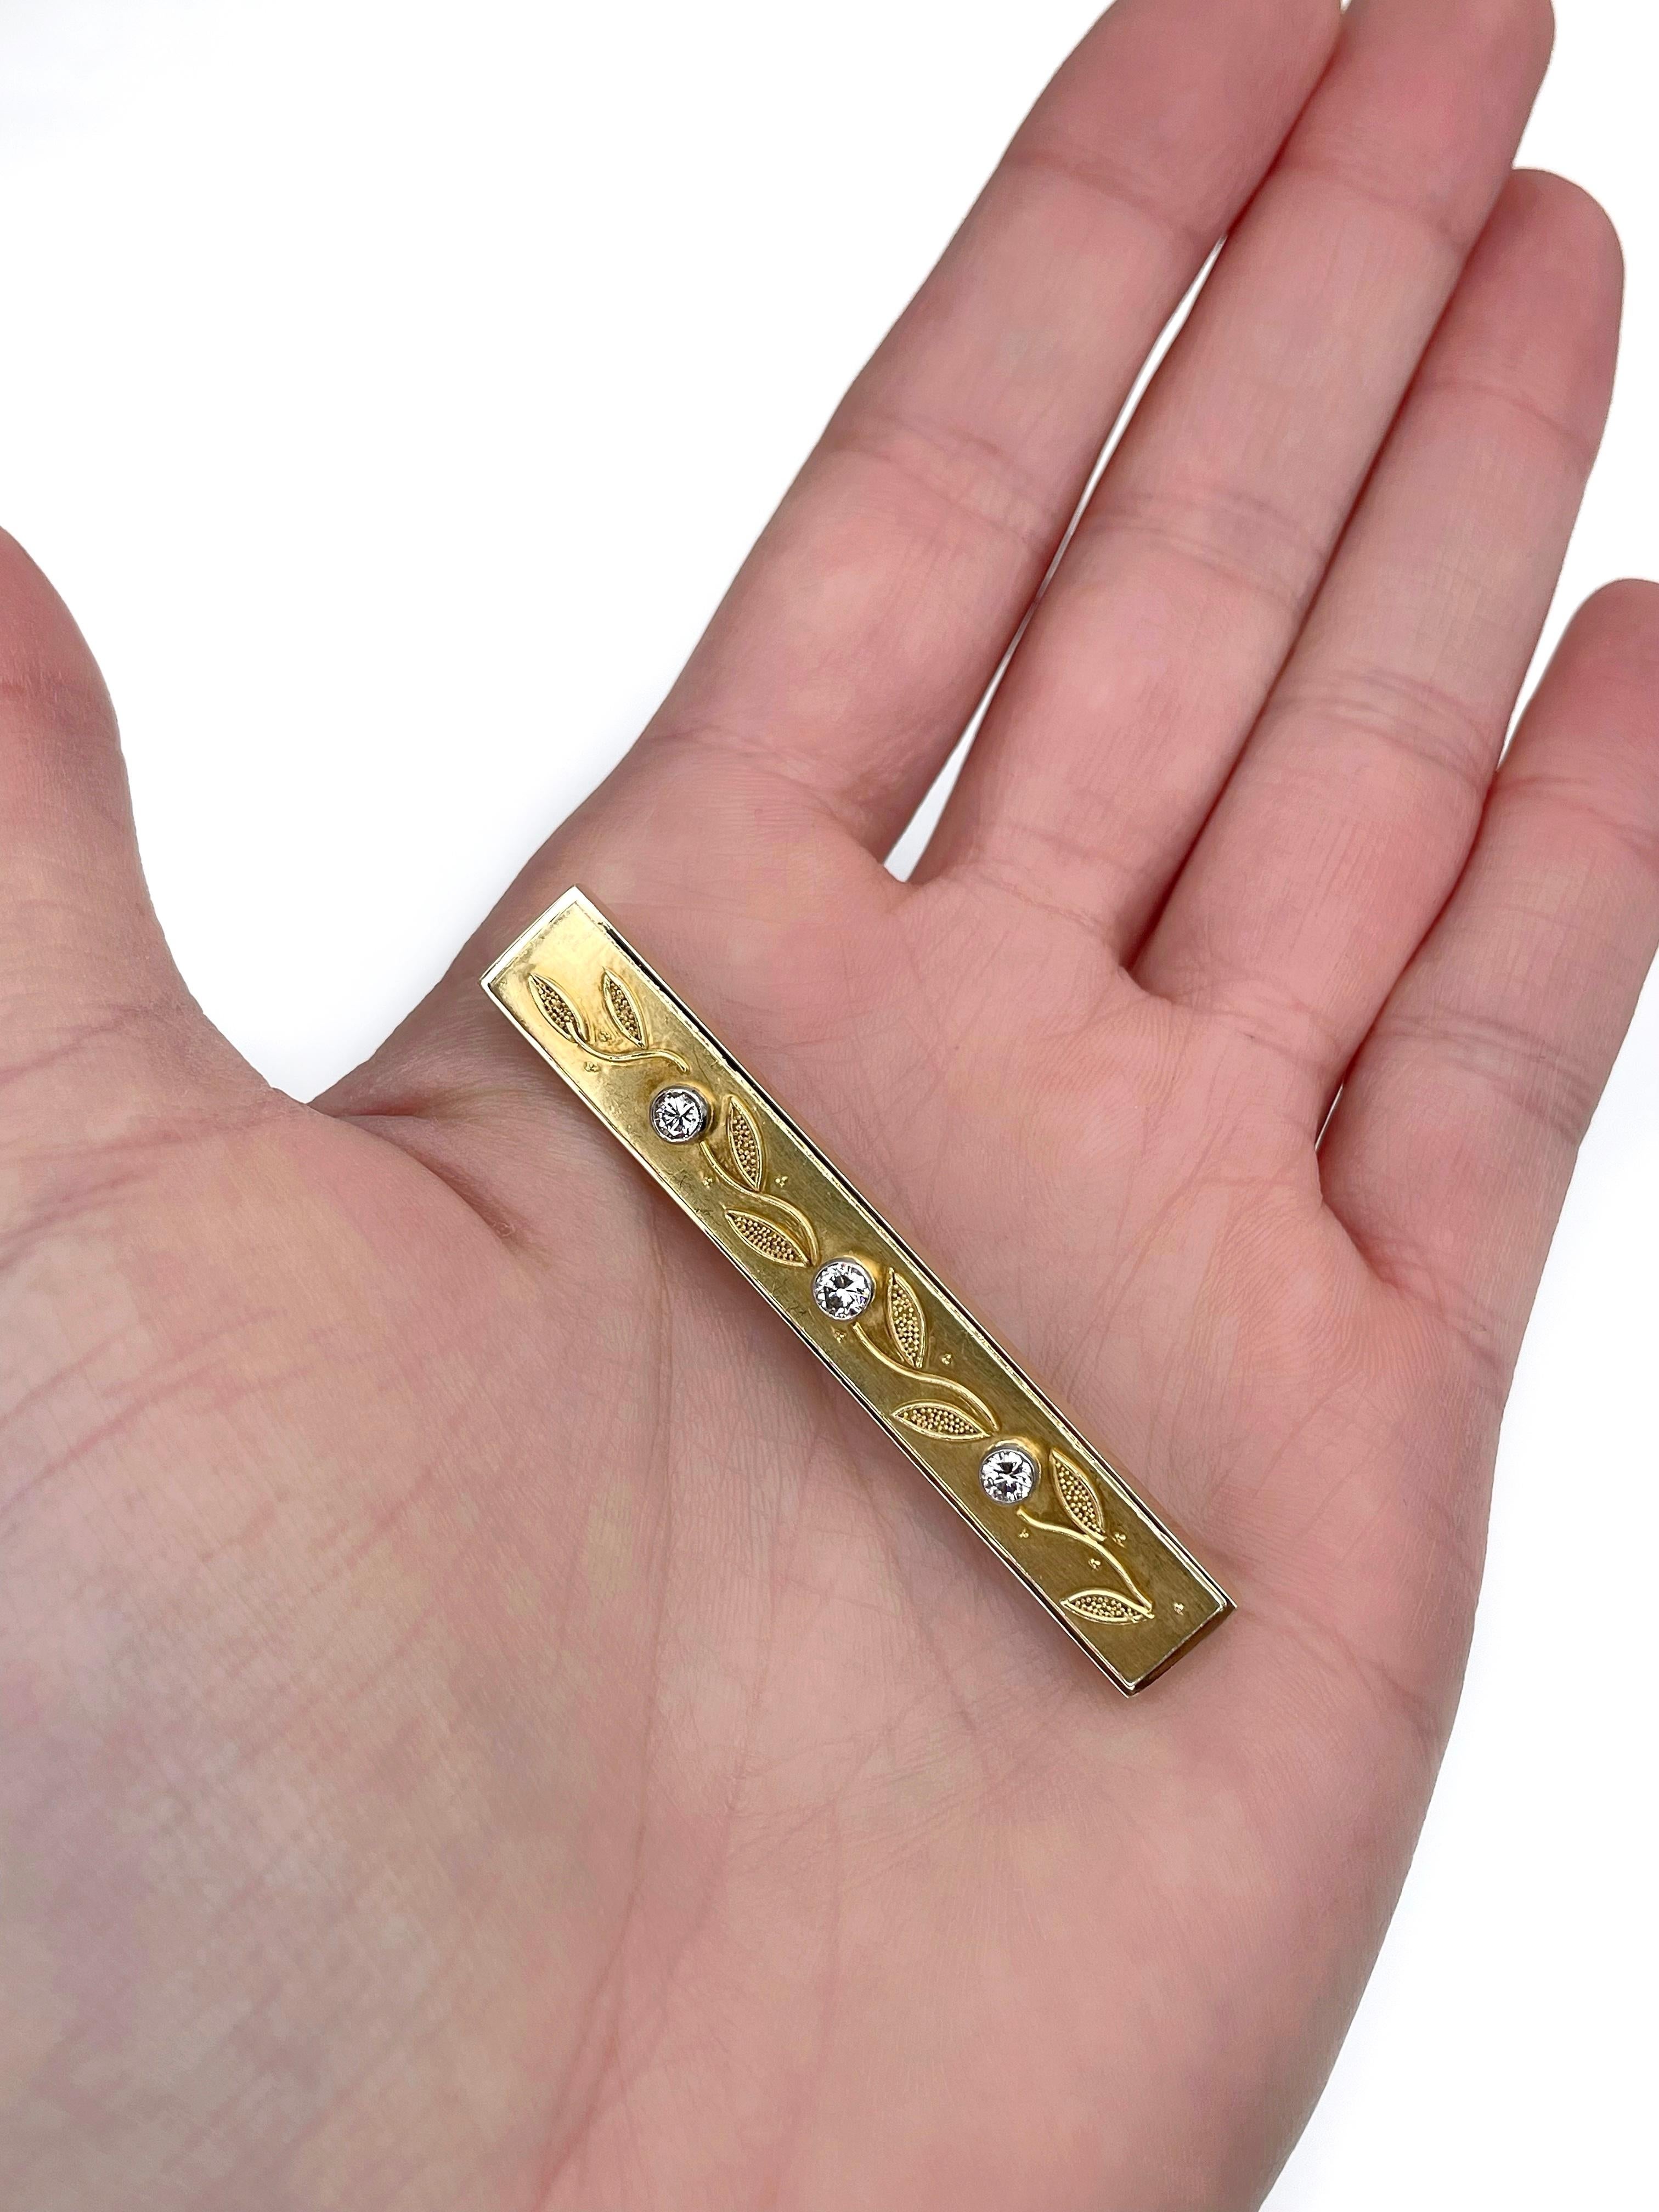 This is an Art Deco floral ornament bar brooch crafted in 14K yellow gold. Circa 1940. 

The piece features 3 round brilliant cut diamonds: 0.30ct, RW-W, VS

Has a safe clasp. 

Weight: 7.97g
Length: 5.5cm
Width: 0.8cm

———

If you have any